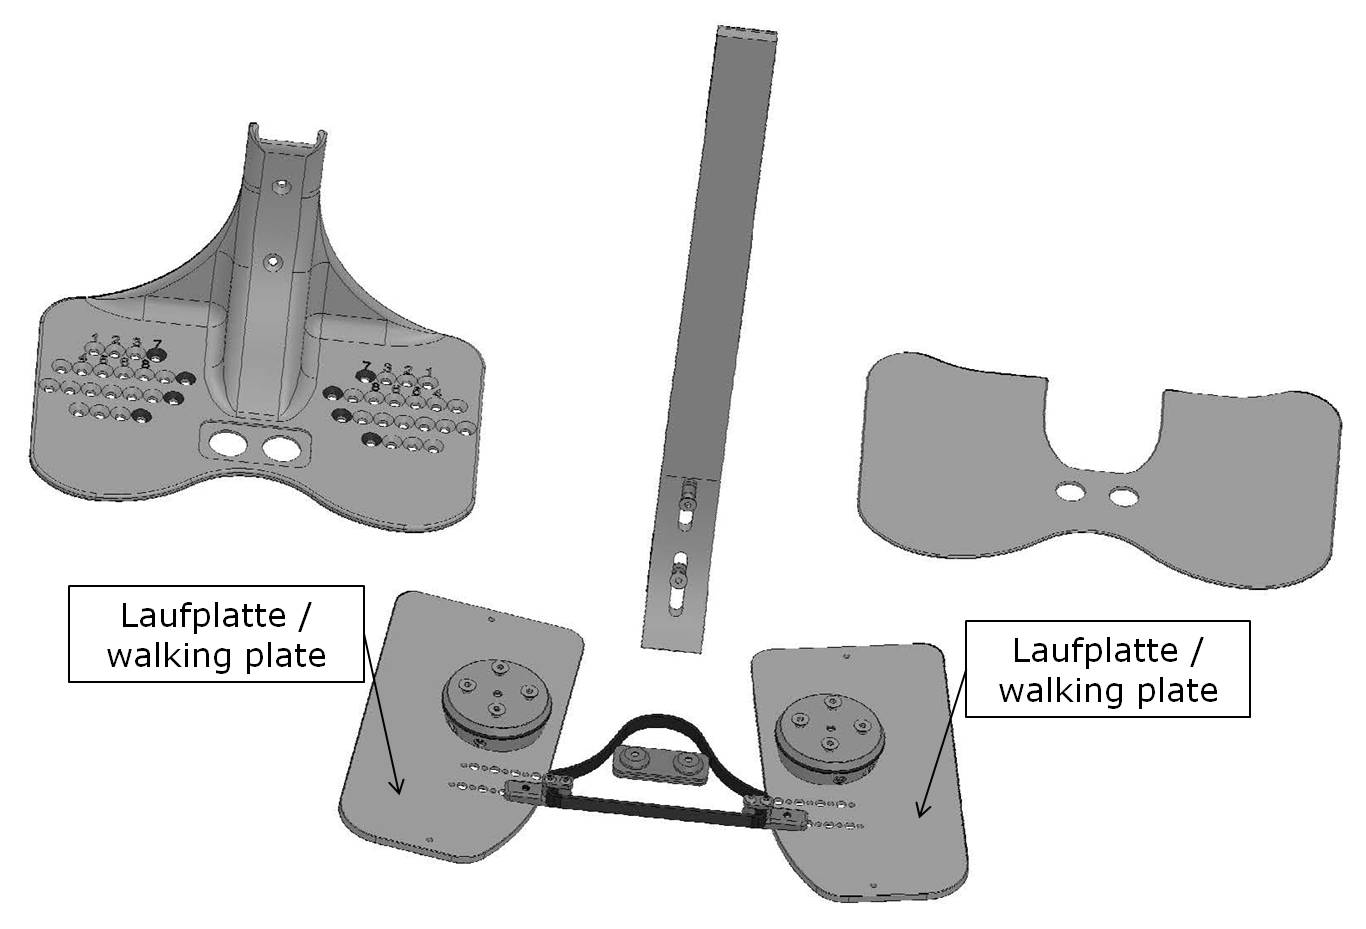 Walking plate for the Go-LiTE